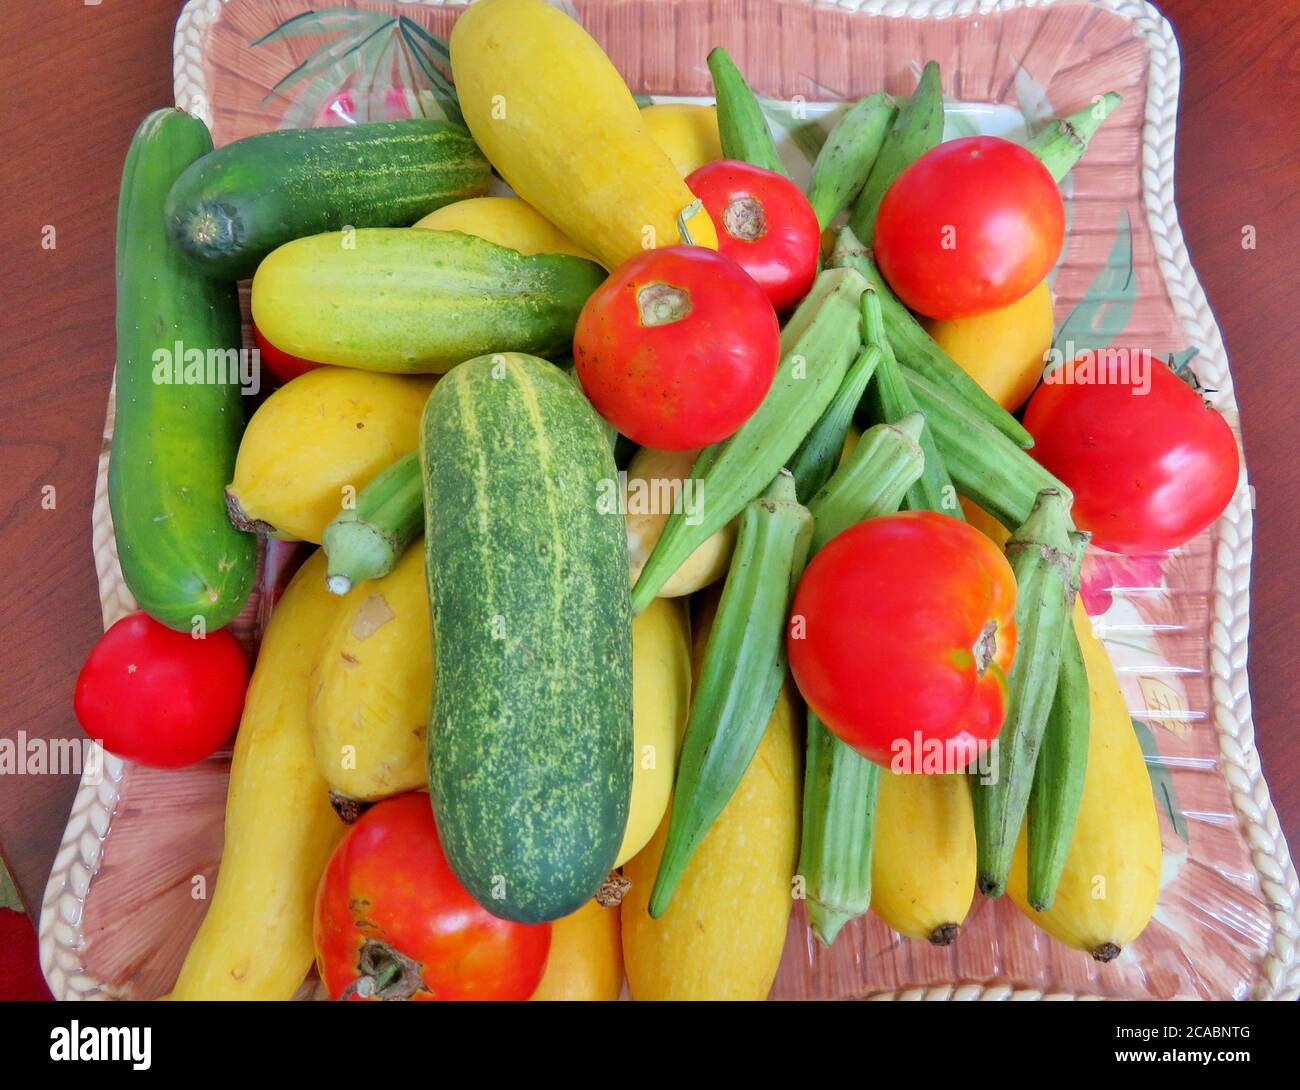 Summer vegetables, cucumbers, squash, okra and tomatoes Stock Photo